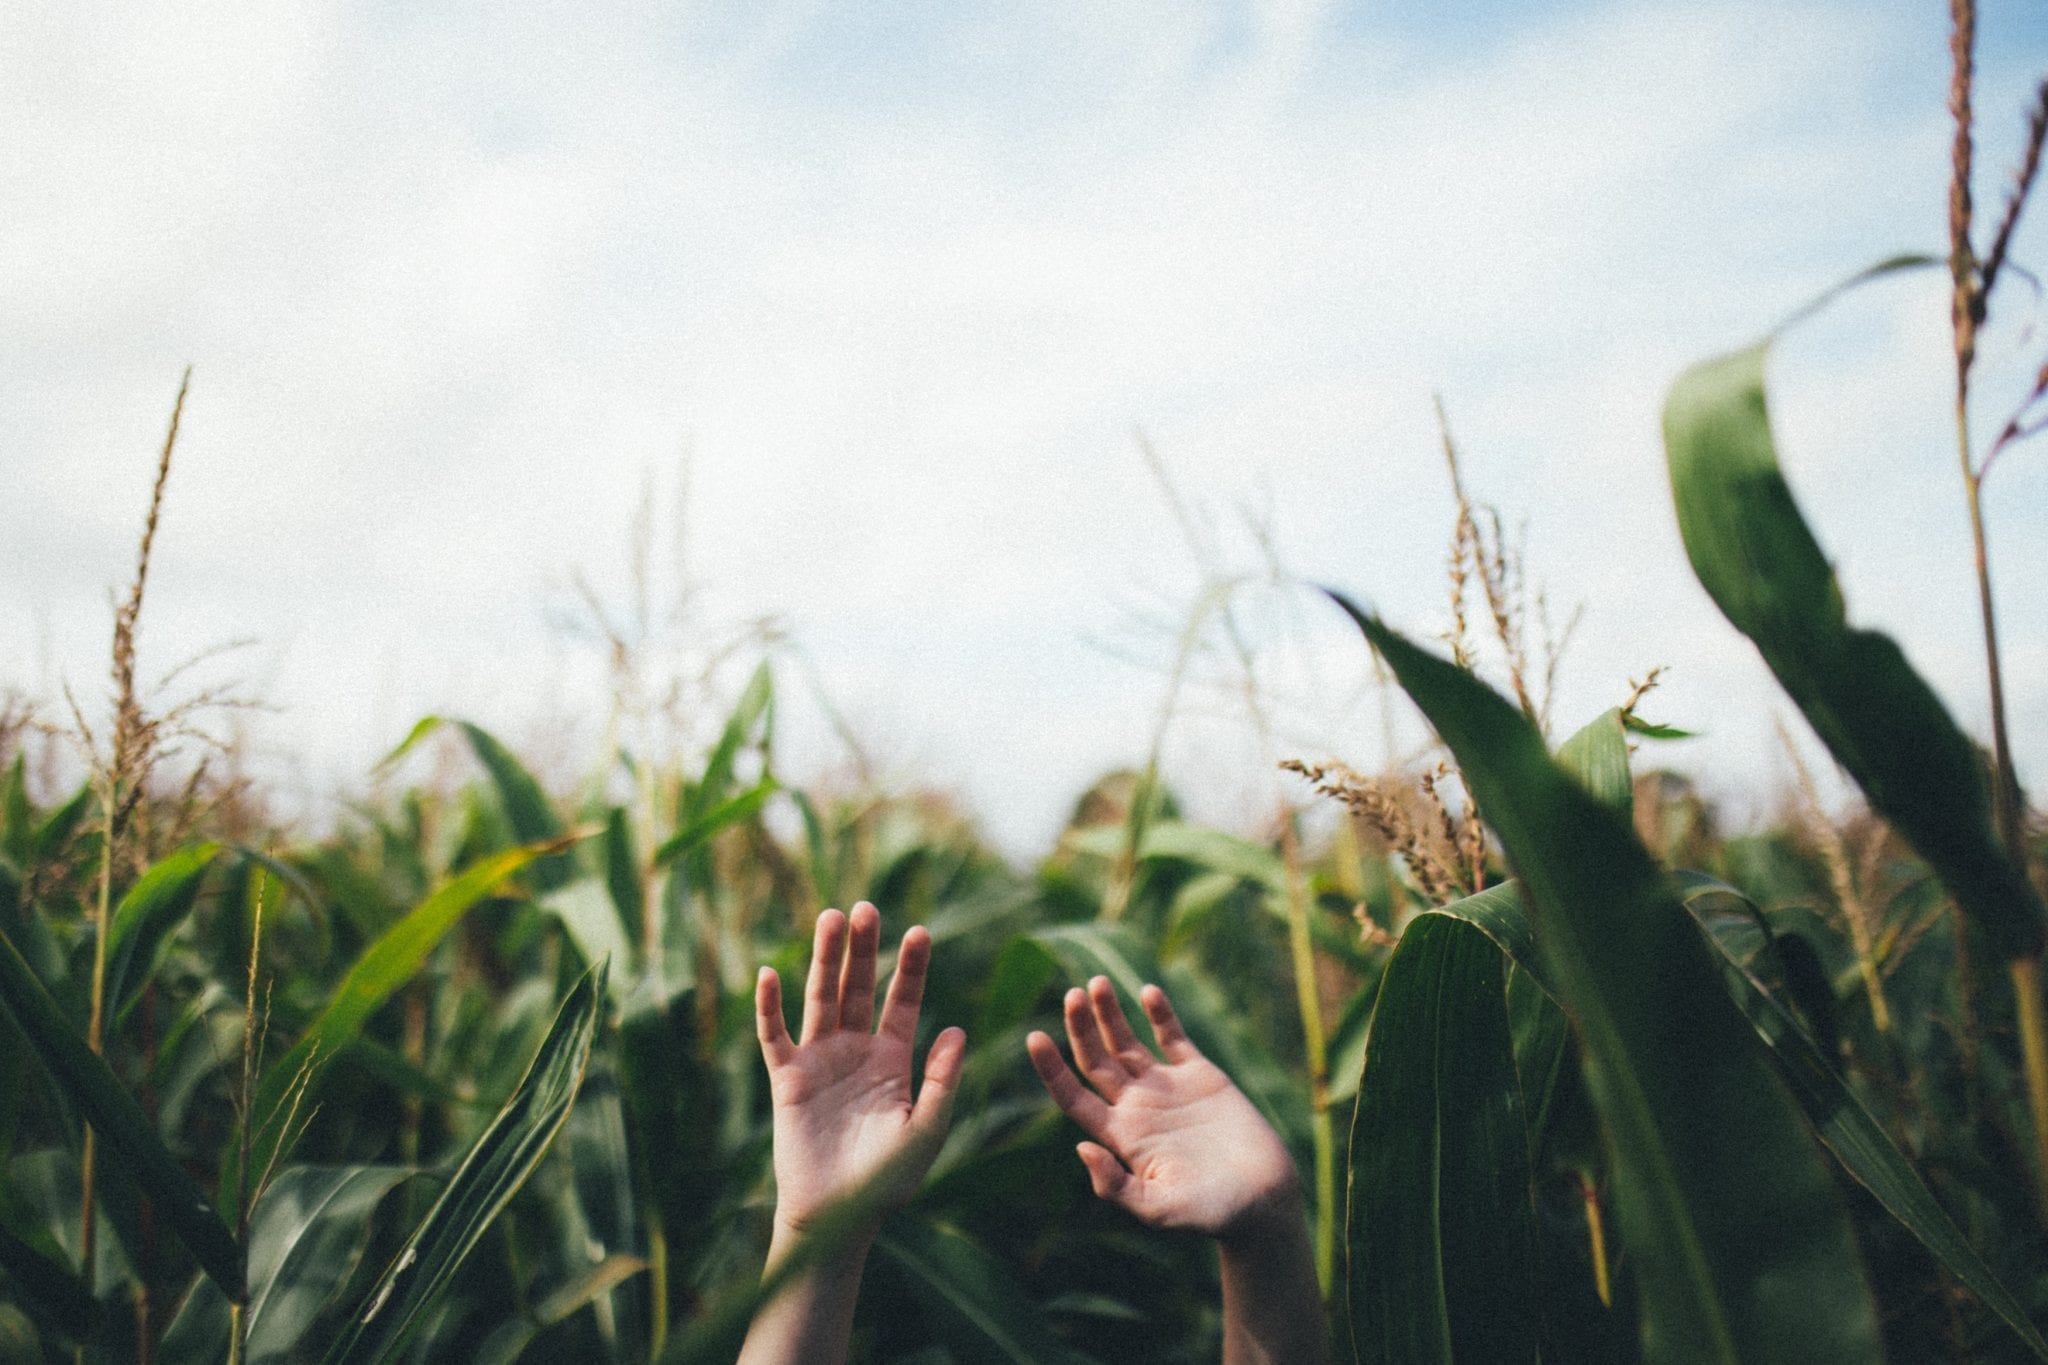 Two disembodied hands reach for the sky, in between endless rows of corn.